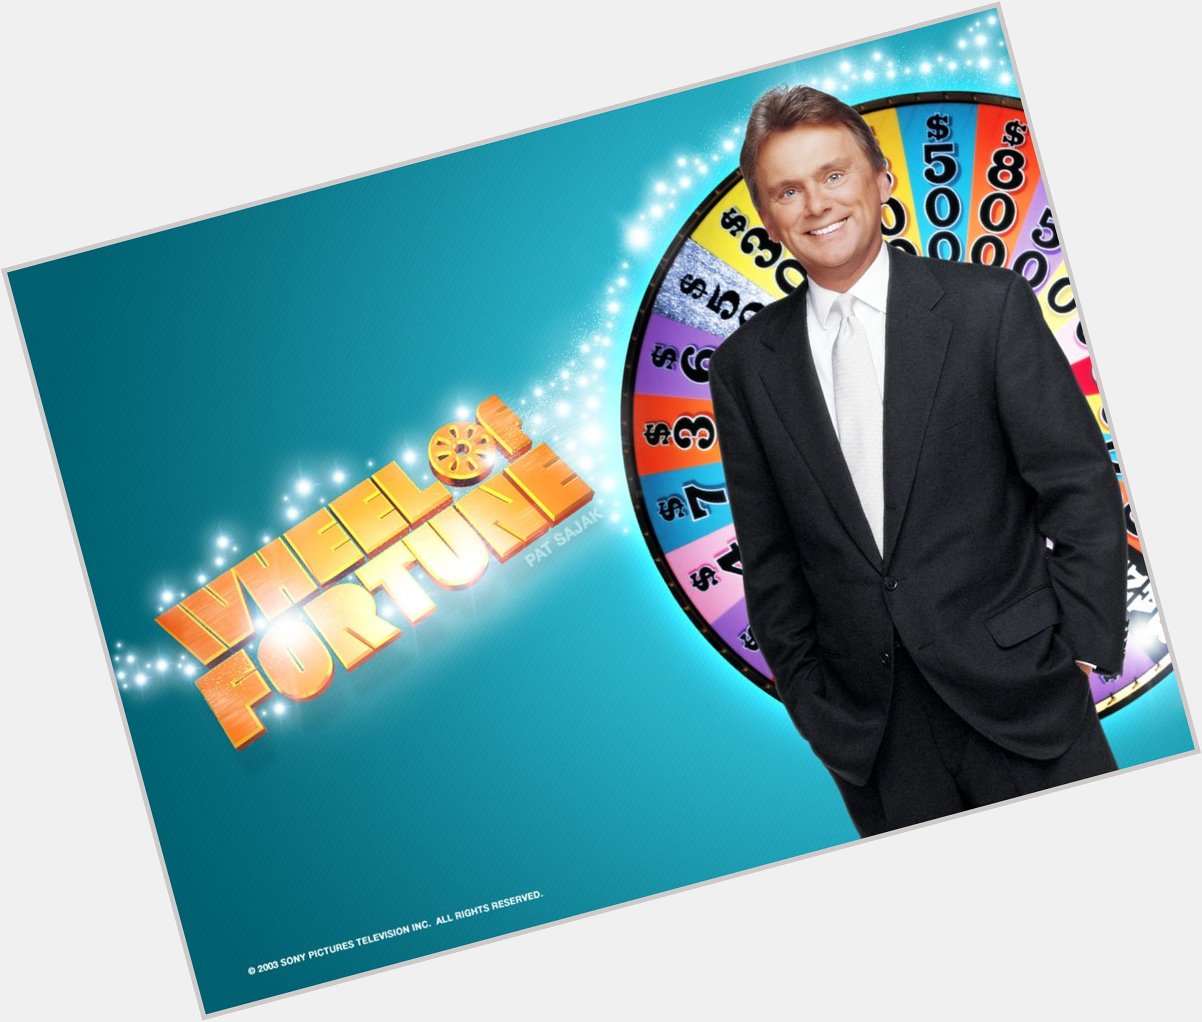 Happy Birthday to Pat Sajak, who turns 69 today! 